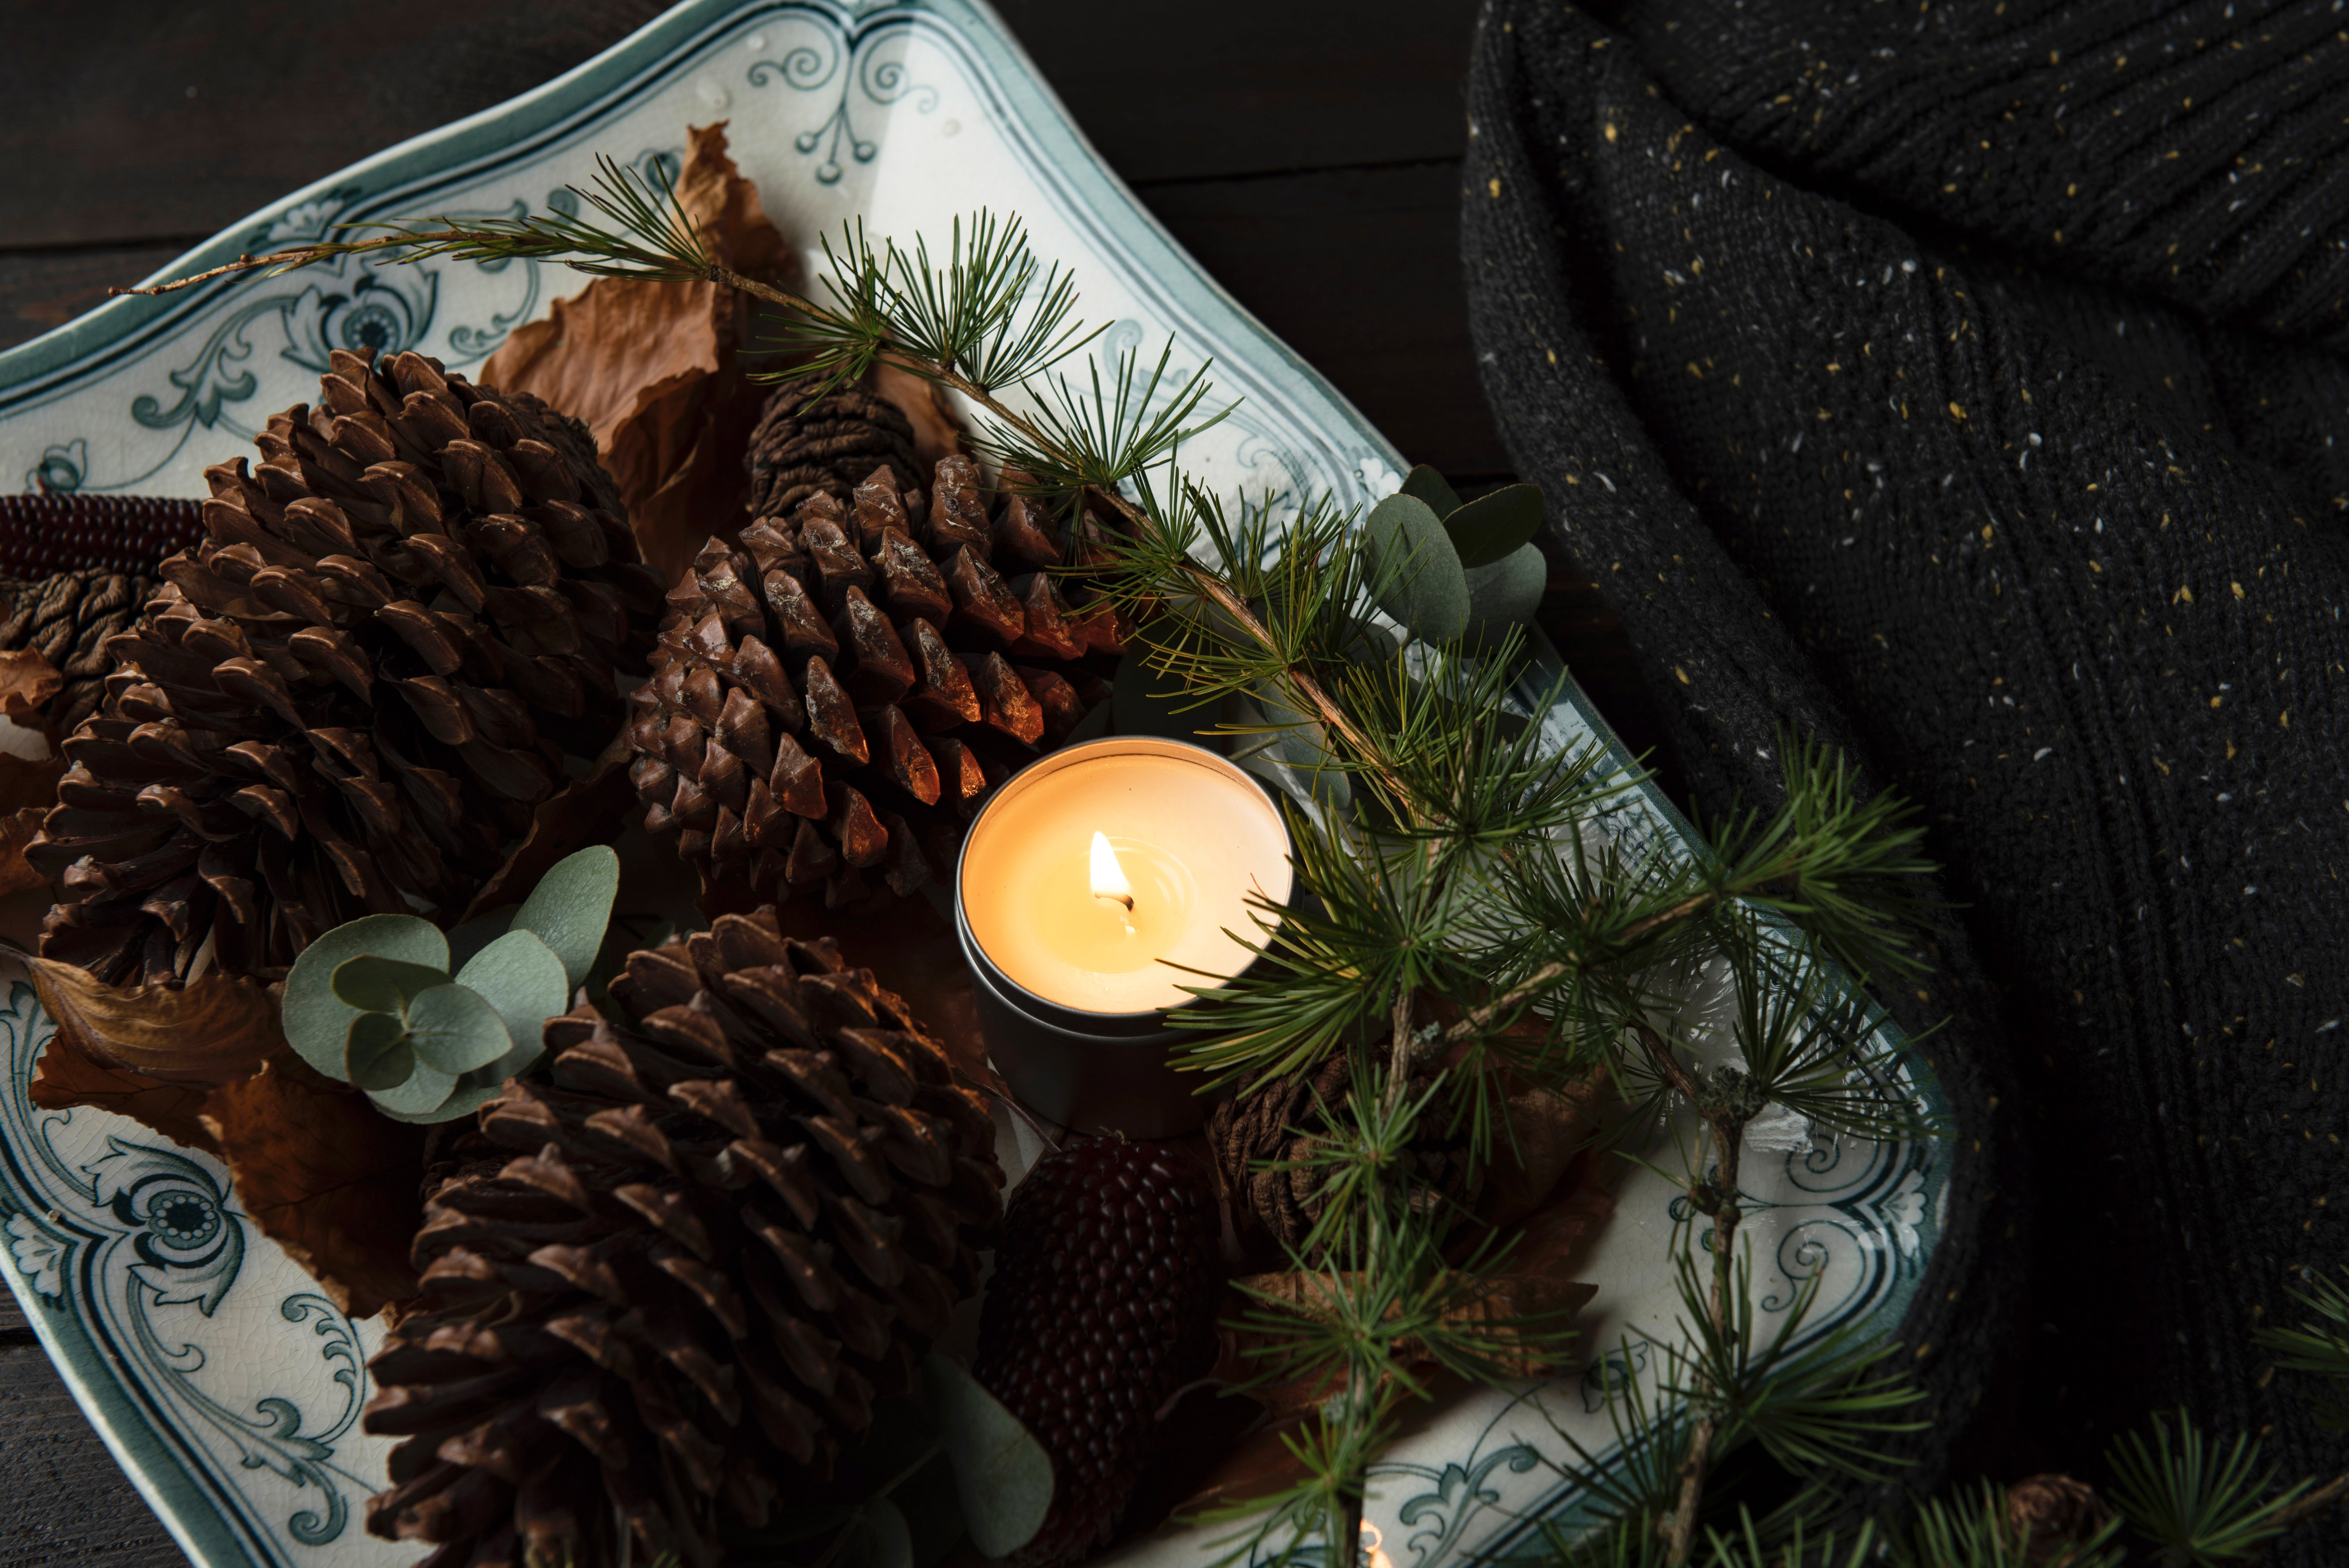 How to Make Scented Pine Cones